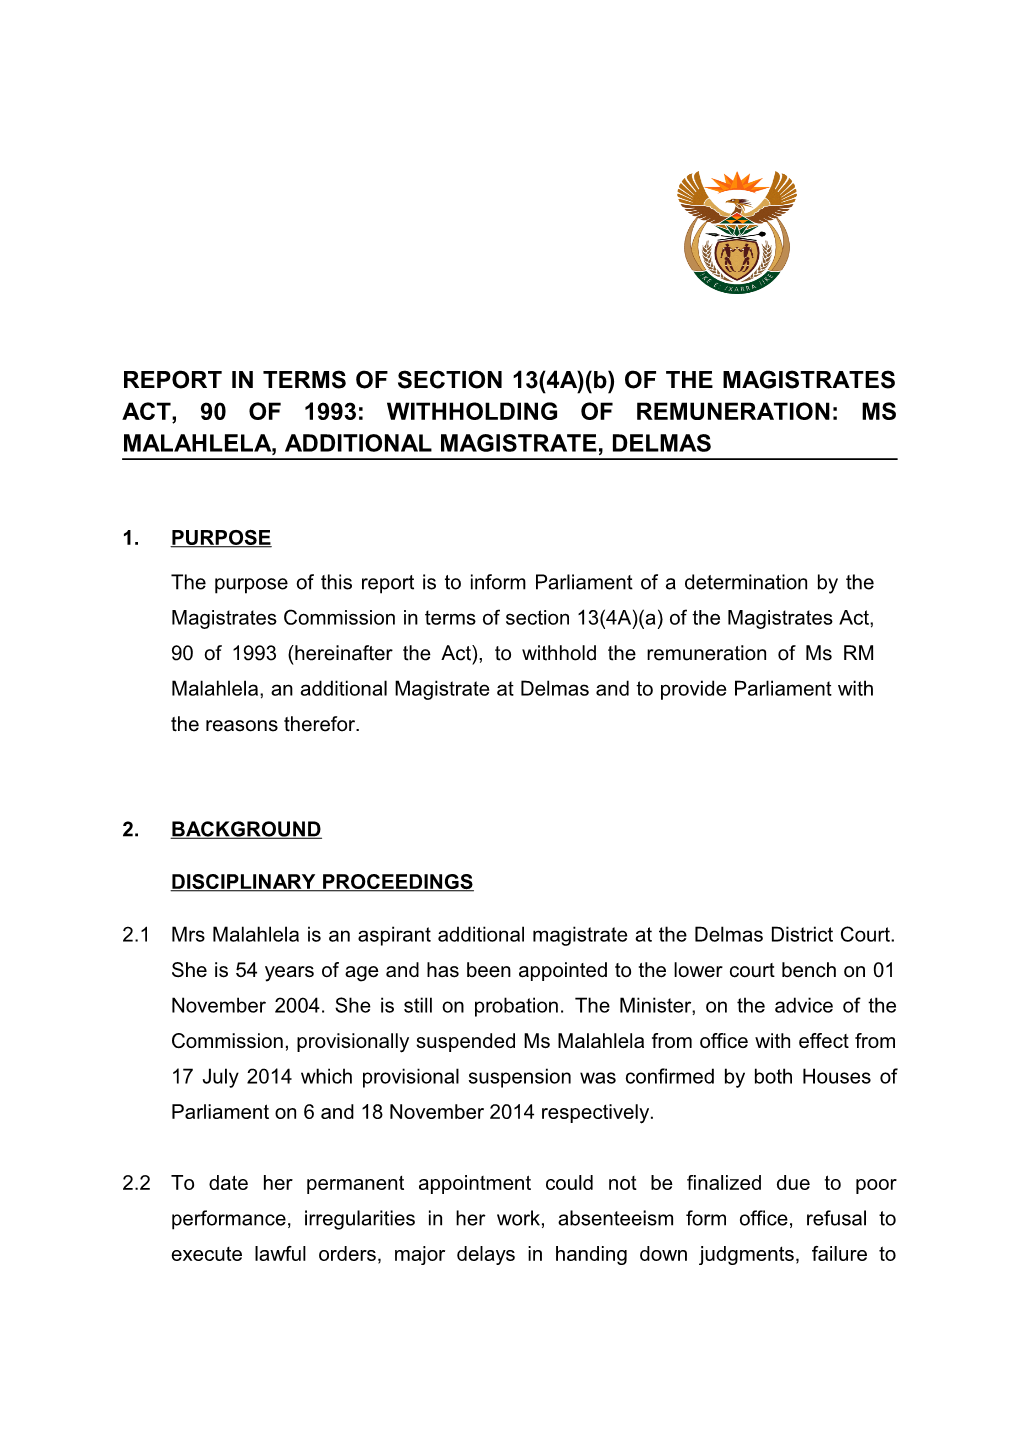 REPORT in TERMS of SECTION 13(4A)(B) of the MAGISTRATES ACT, 90 of 1993:WITHHOLDING OF